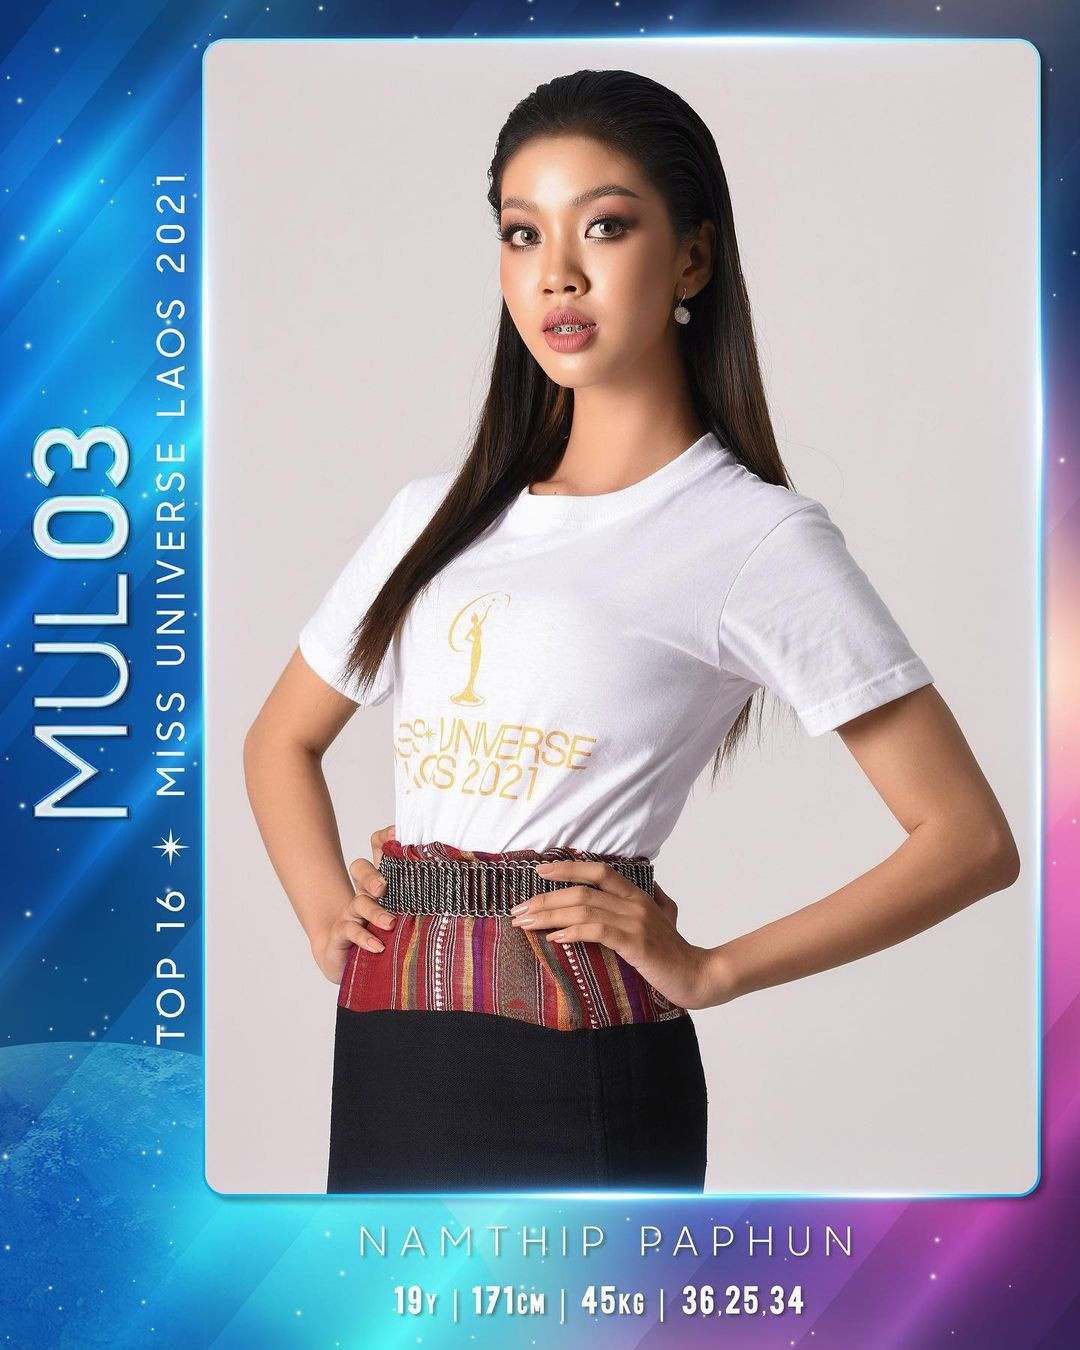 candidatas a miss universe laos 2021. final: 31 oct. 5ANomP